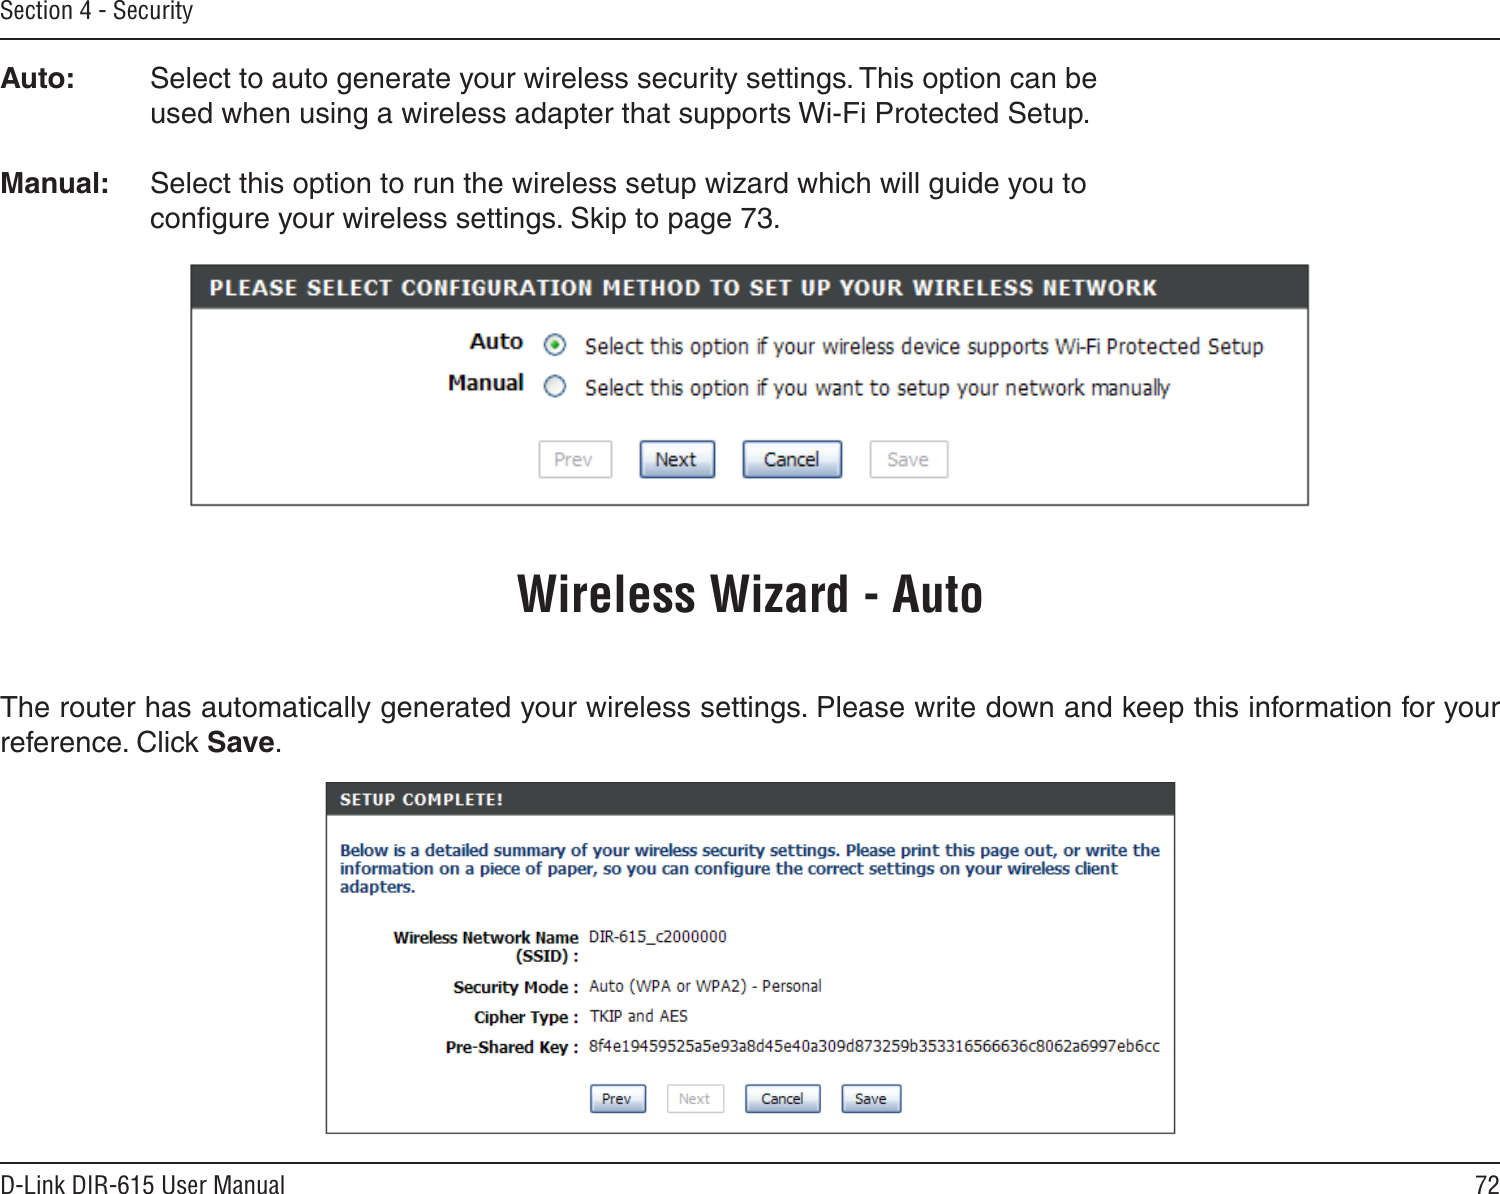 72D-Link DIR-615 User ManualSection 4 - SecurityAuto:   Select to auto generate your wireless security settings. This option can be     used when using a wireless adapter that supports Wi-Fi Protected Setup. Manual:  Select this option to run the wireless setup wizard which will guide you to     conﬁgure your wireless settings. Skip to page 73.Wireless Wizard - AutoThe router has automatically generated your wireless settings. Please write down and keep this information for your reference. Click Save.